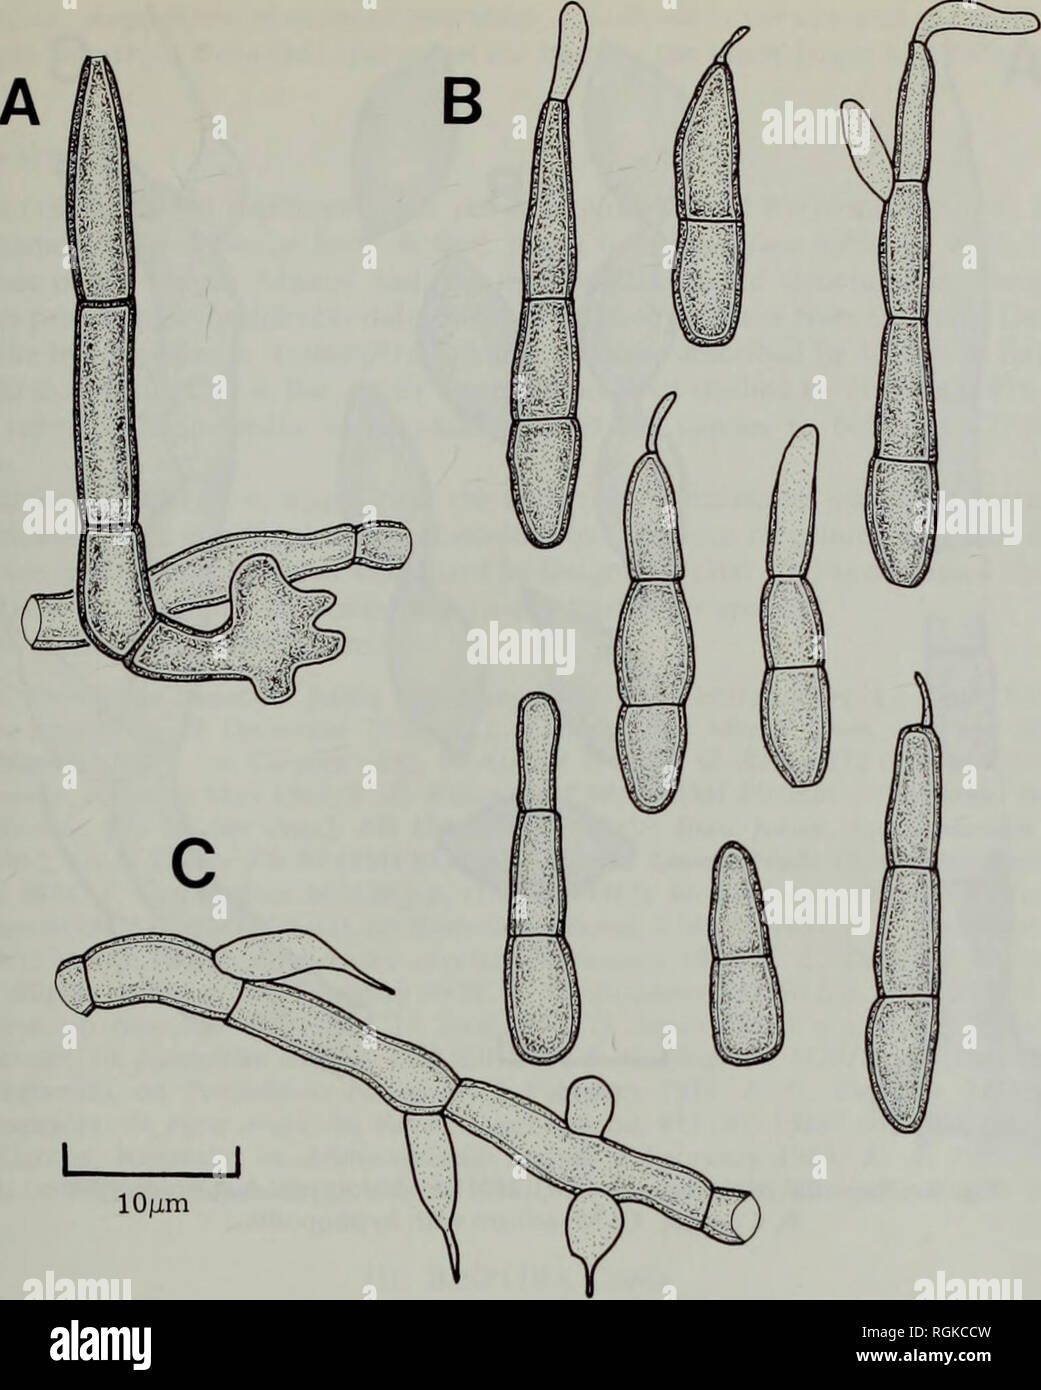 . Bulletin of the British Museum (Natural History) Botany. THE LICHENICOLOUS HYPHOMYCETES 205. Fig. 7 Ampullifera pirozynskii (IMI 106630c/—holotype). A, Conidiophore. B, Conidia. C, Mycelium with hyphopodia. Distribution: Tanzania. Known only from the type collection. Observations: This species is perhaps most closely allied to the Brazilian Ampullifera amoeboides from which it is distinguished by the preponderance of 2-septate conidia which also tend to be somewhat narrower. 6. Ampullifera ugandensis Deight., Mycol. Pap. 78 : 39 (1960). (Fig. 8) Type: Uganda, Masaka Road, associated with lic Stock Photo